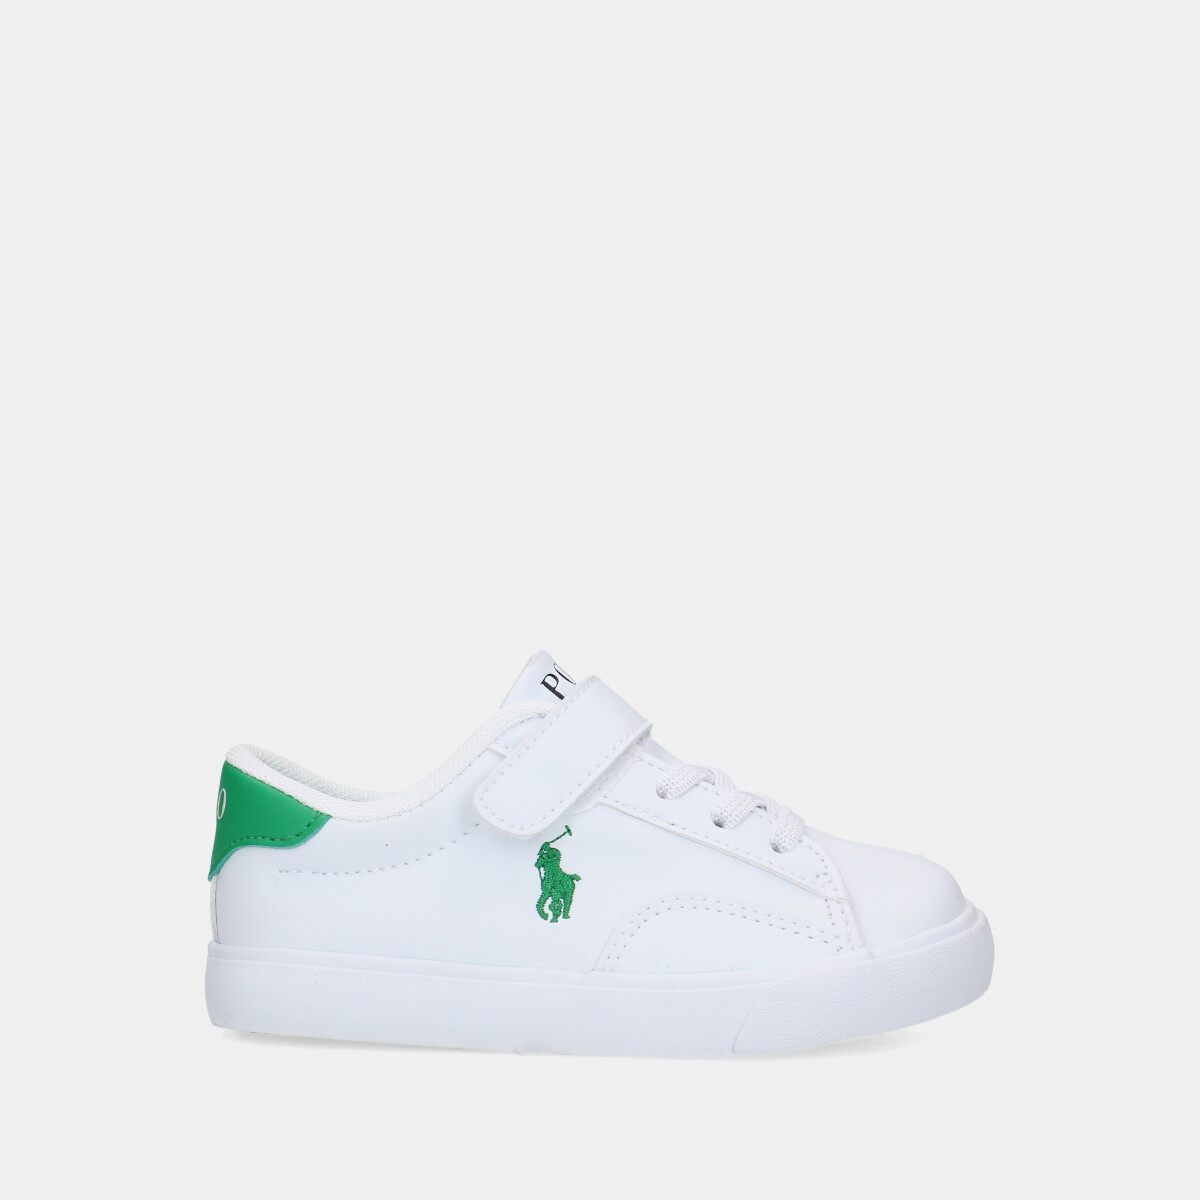 Polo Ralph Lauren Theron V PS White / Green peuter sneakers
